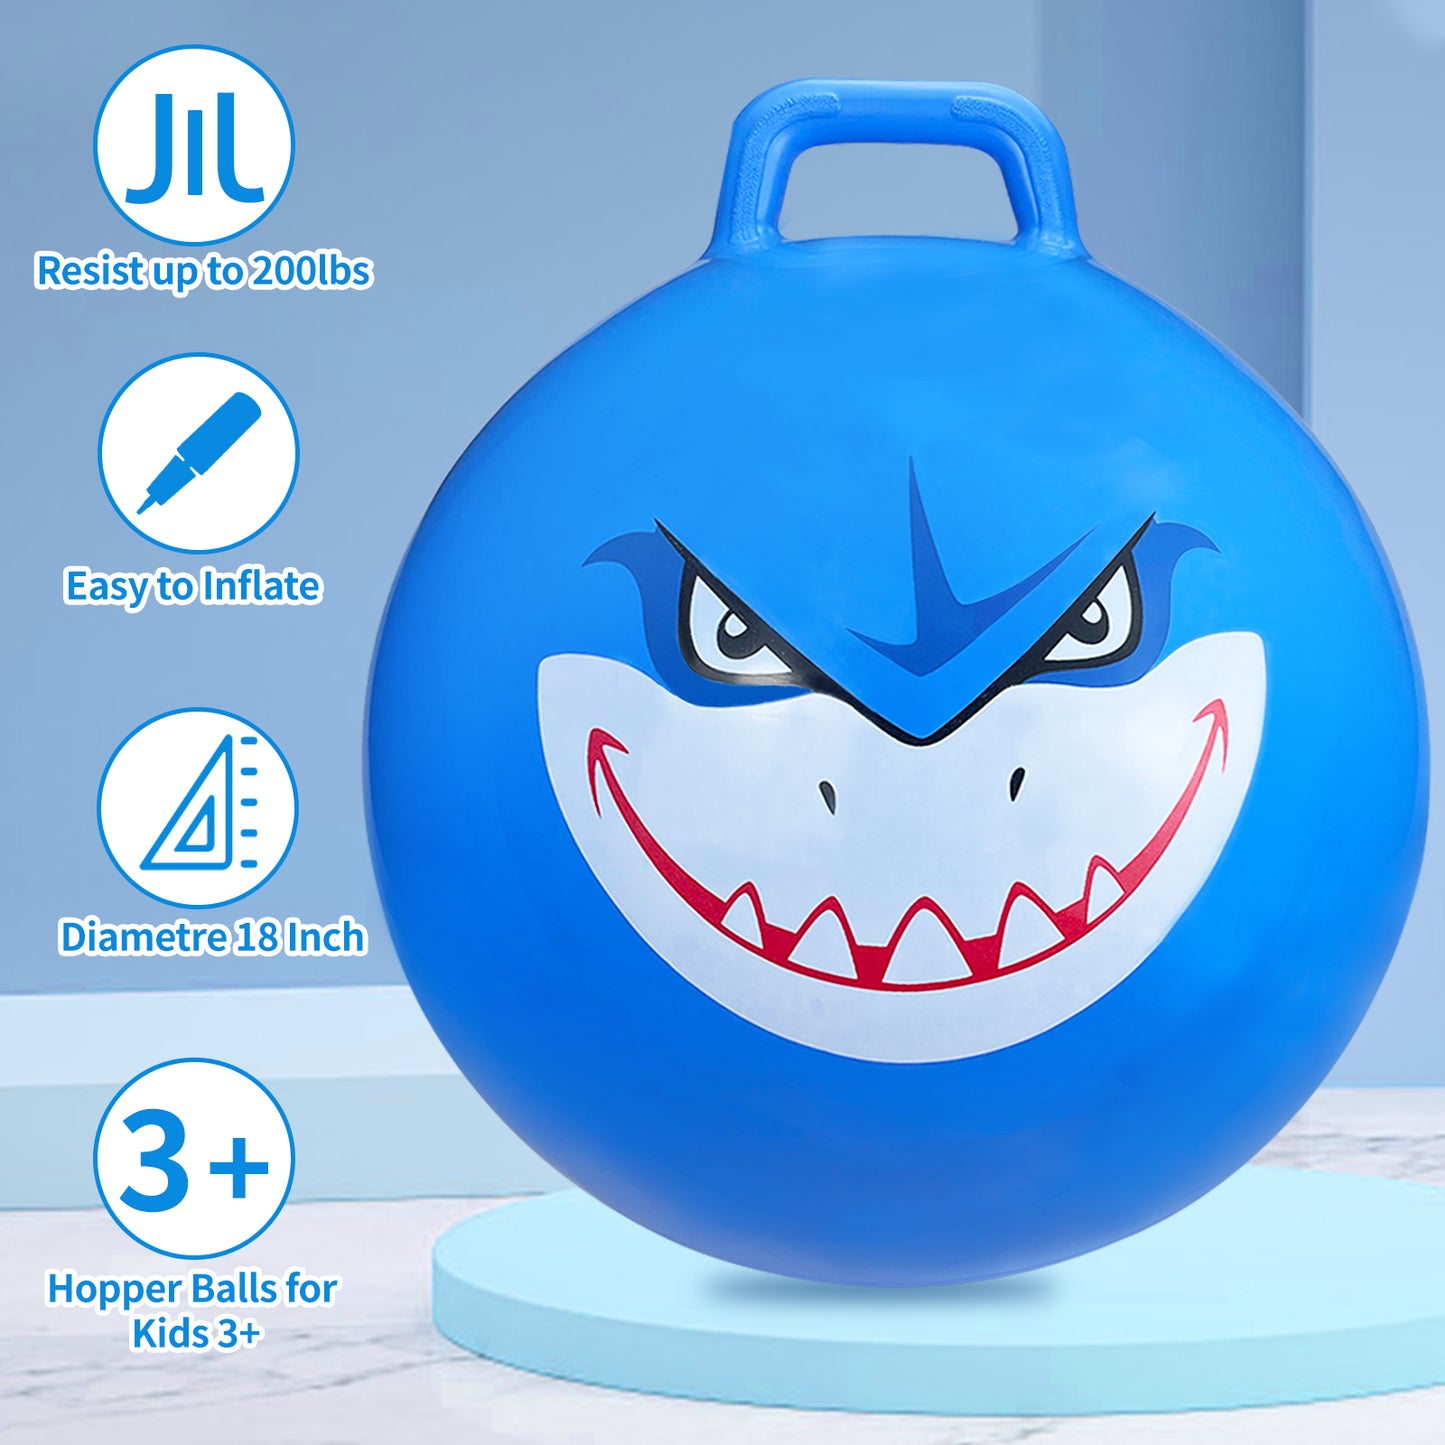 "Hopper Balls for Kids 2-6 7-9,18 inchs Bouncy Ball with Handle,Hopper Toy Jumping Ball for Indoor and Outdoor Games,Fun Hopping Toys for Boys Girls "